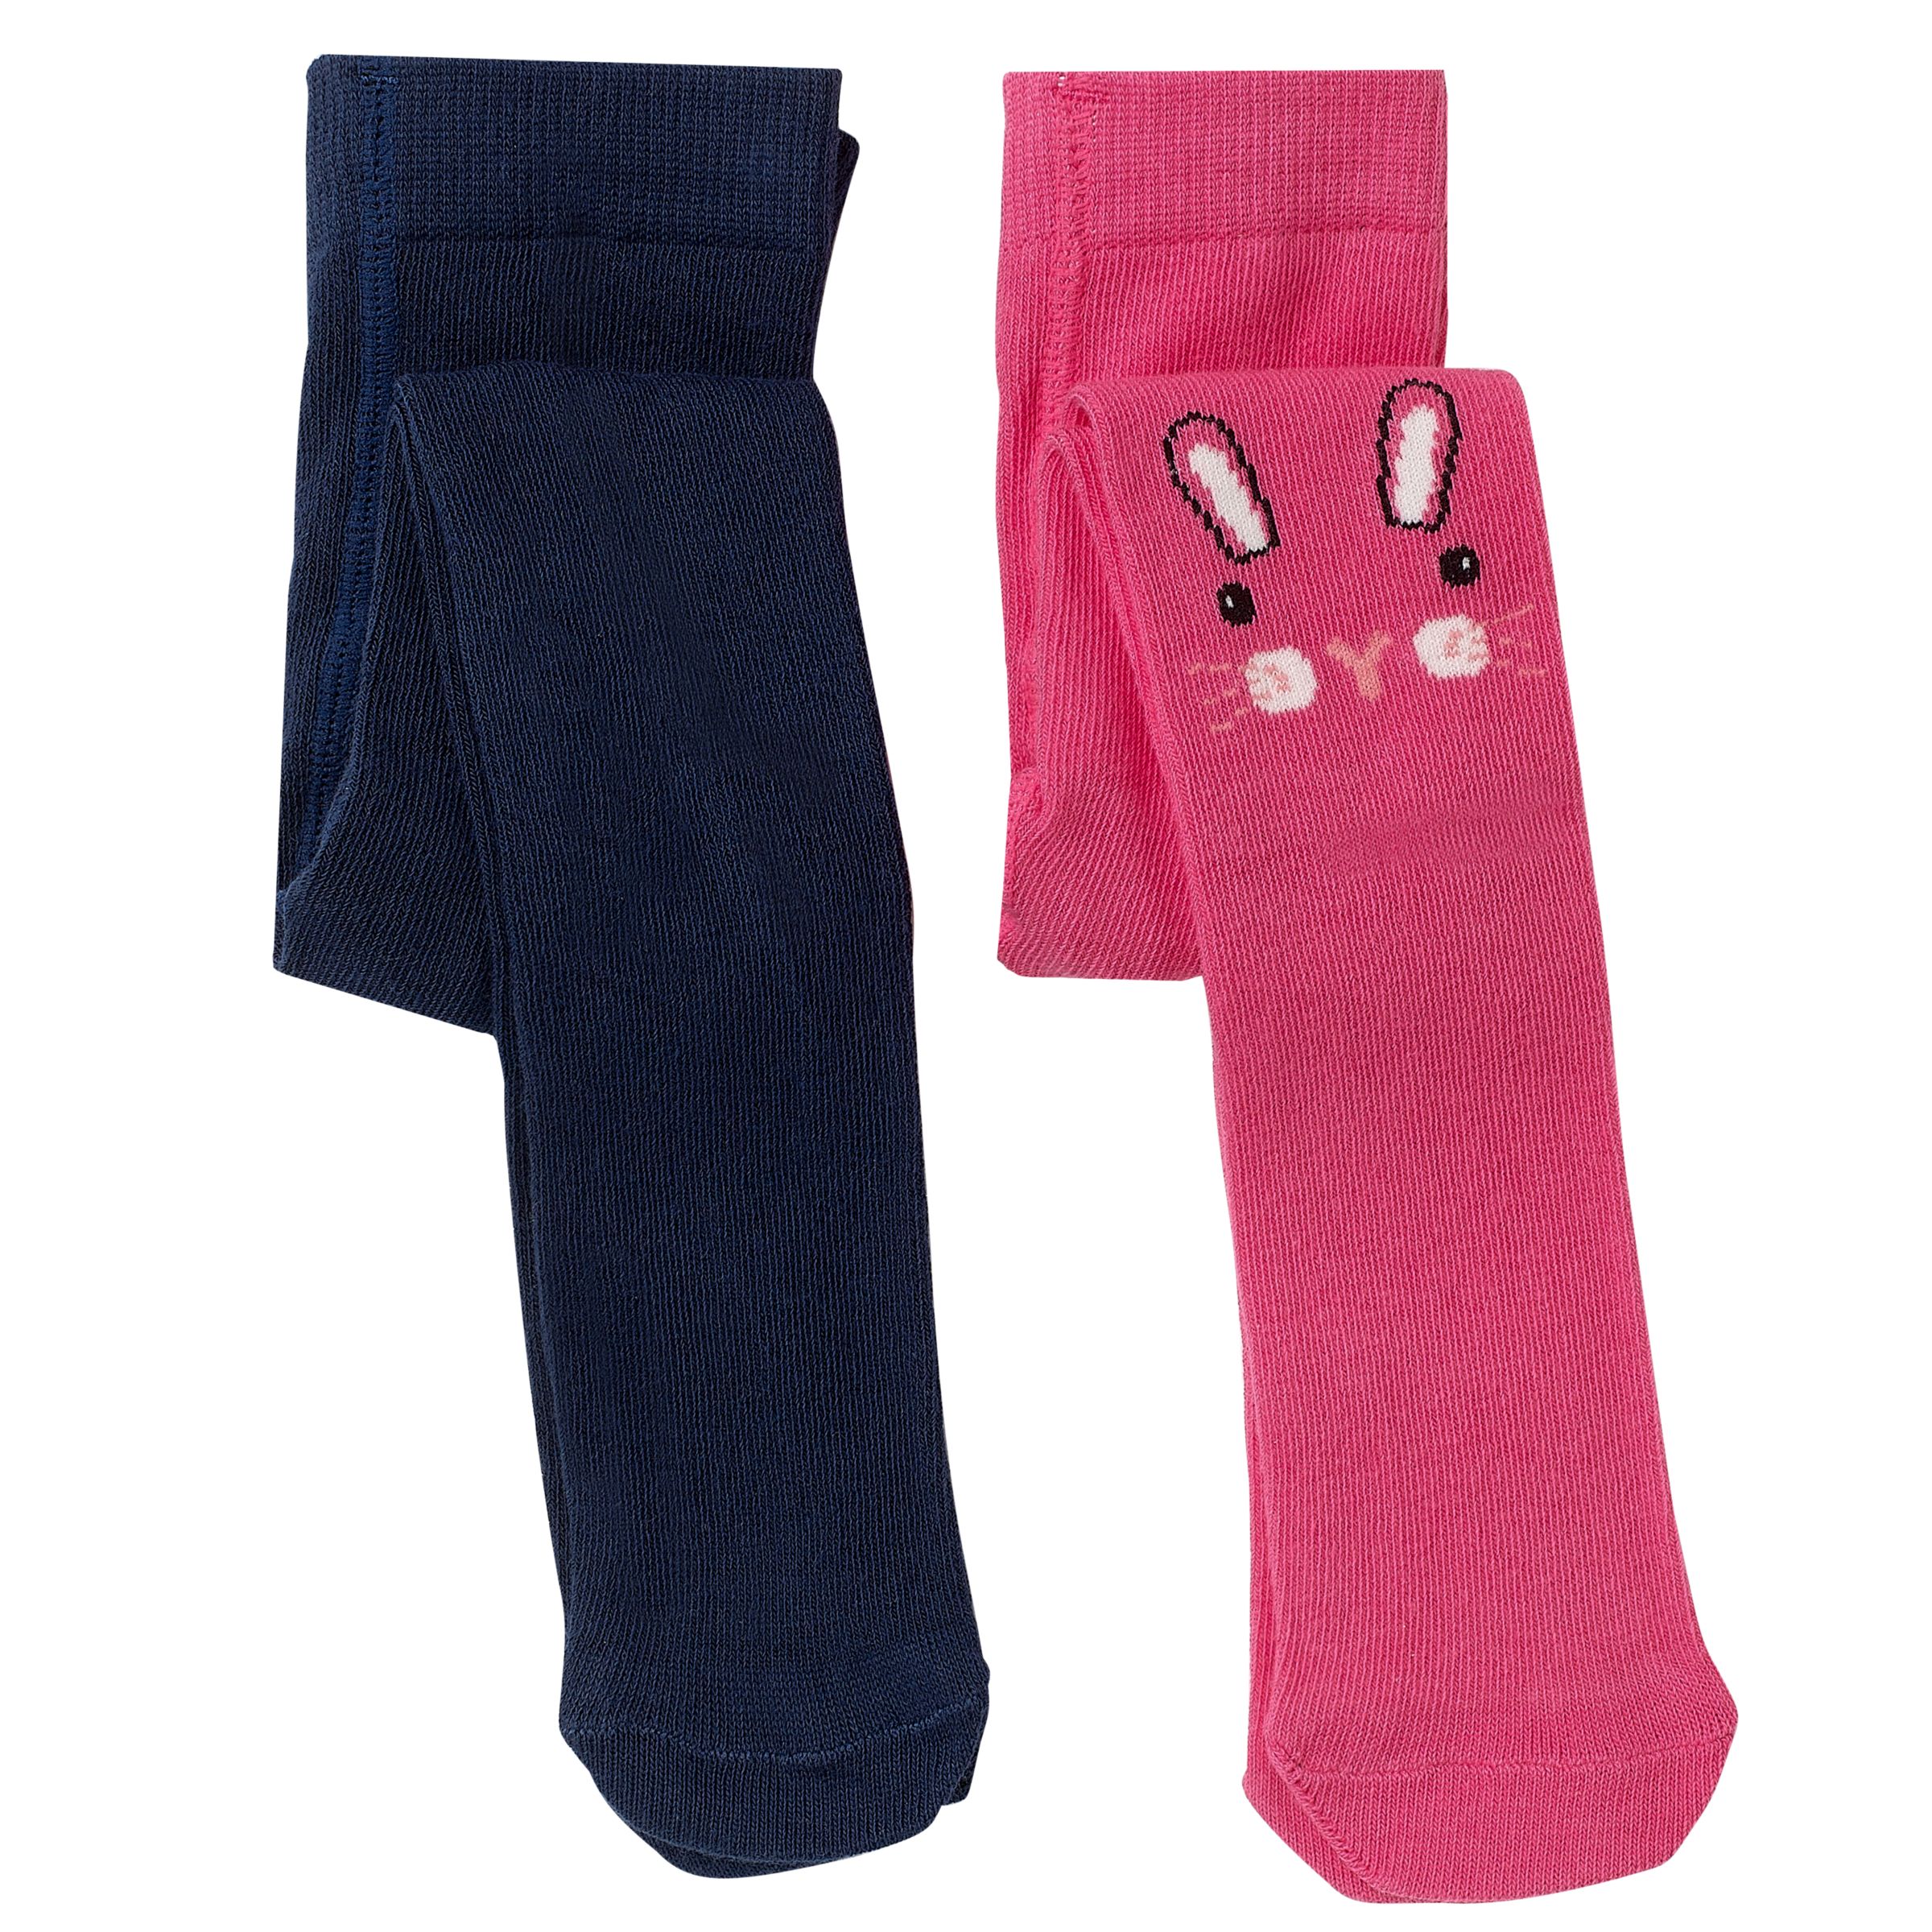 John Lewis & Partners Baby Bunny and Plain Tights, Pack of 2, Navy/Pink